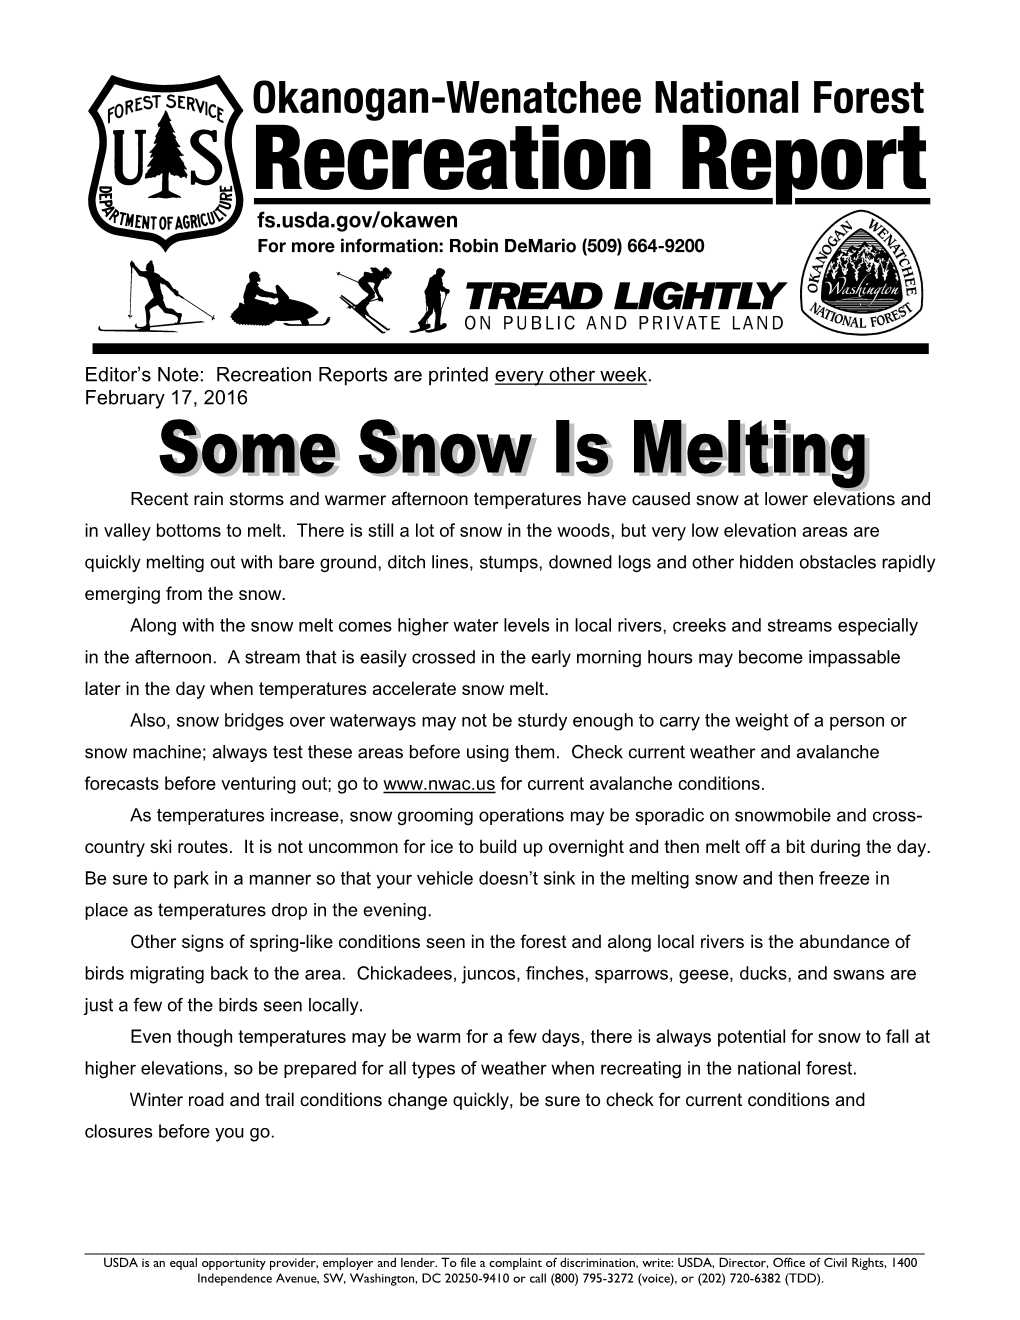 Recreation Reports Are Printed Every Other Week. February 17, 2016